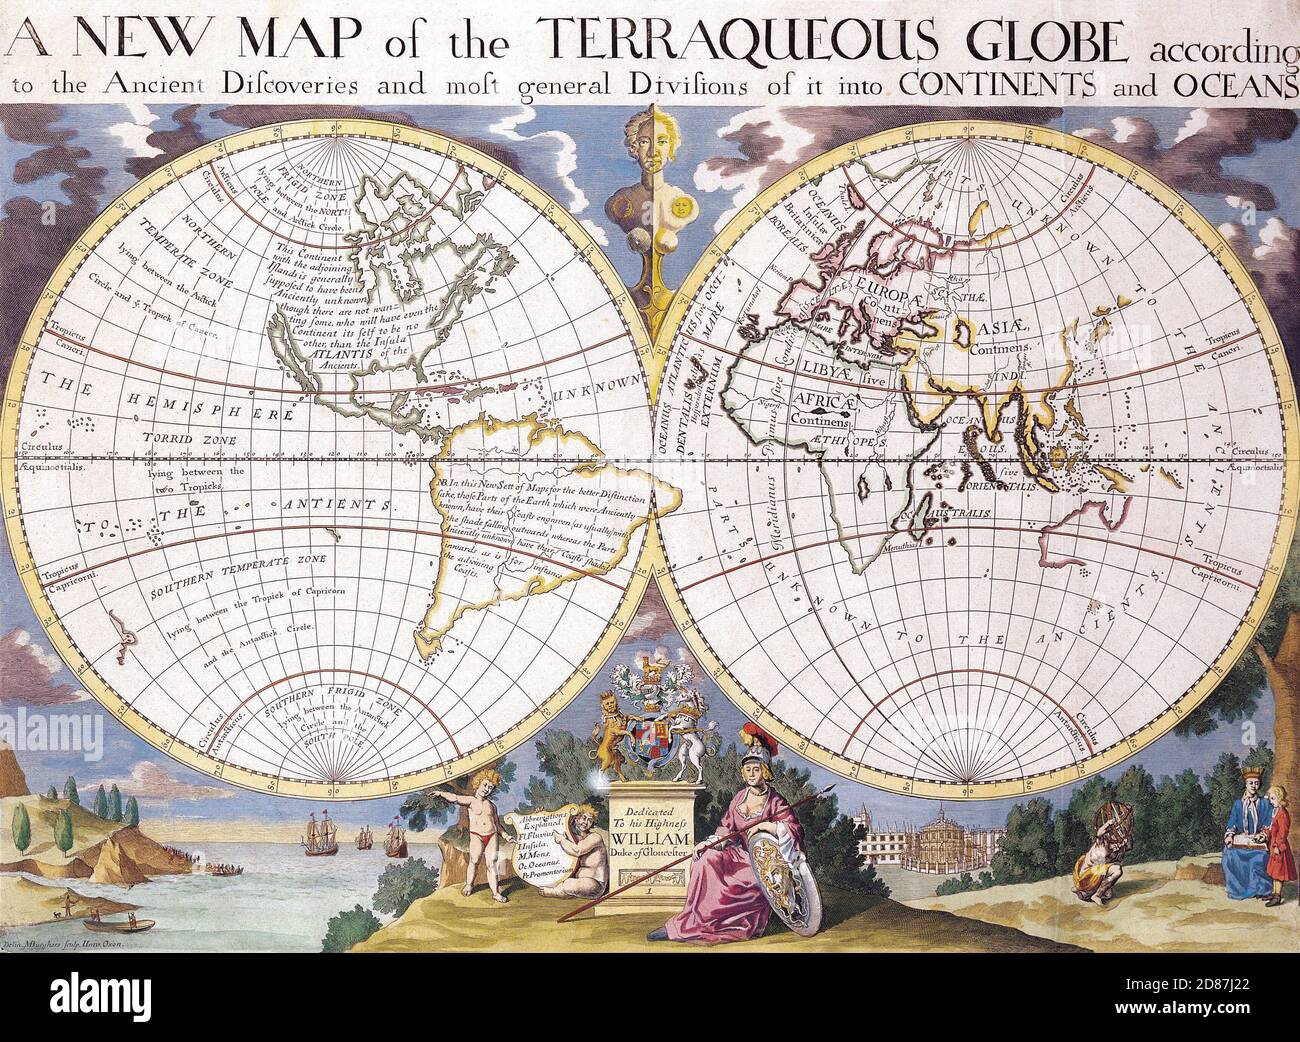 A new map of the Terraqueous Globe. Illustrated old map of the World, vintage style full of details Stock Photo